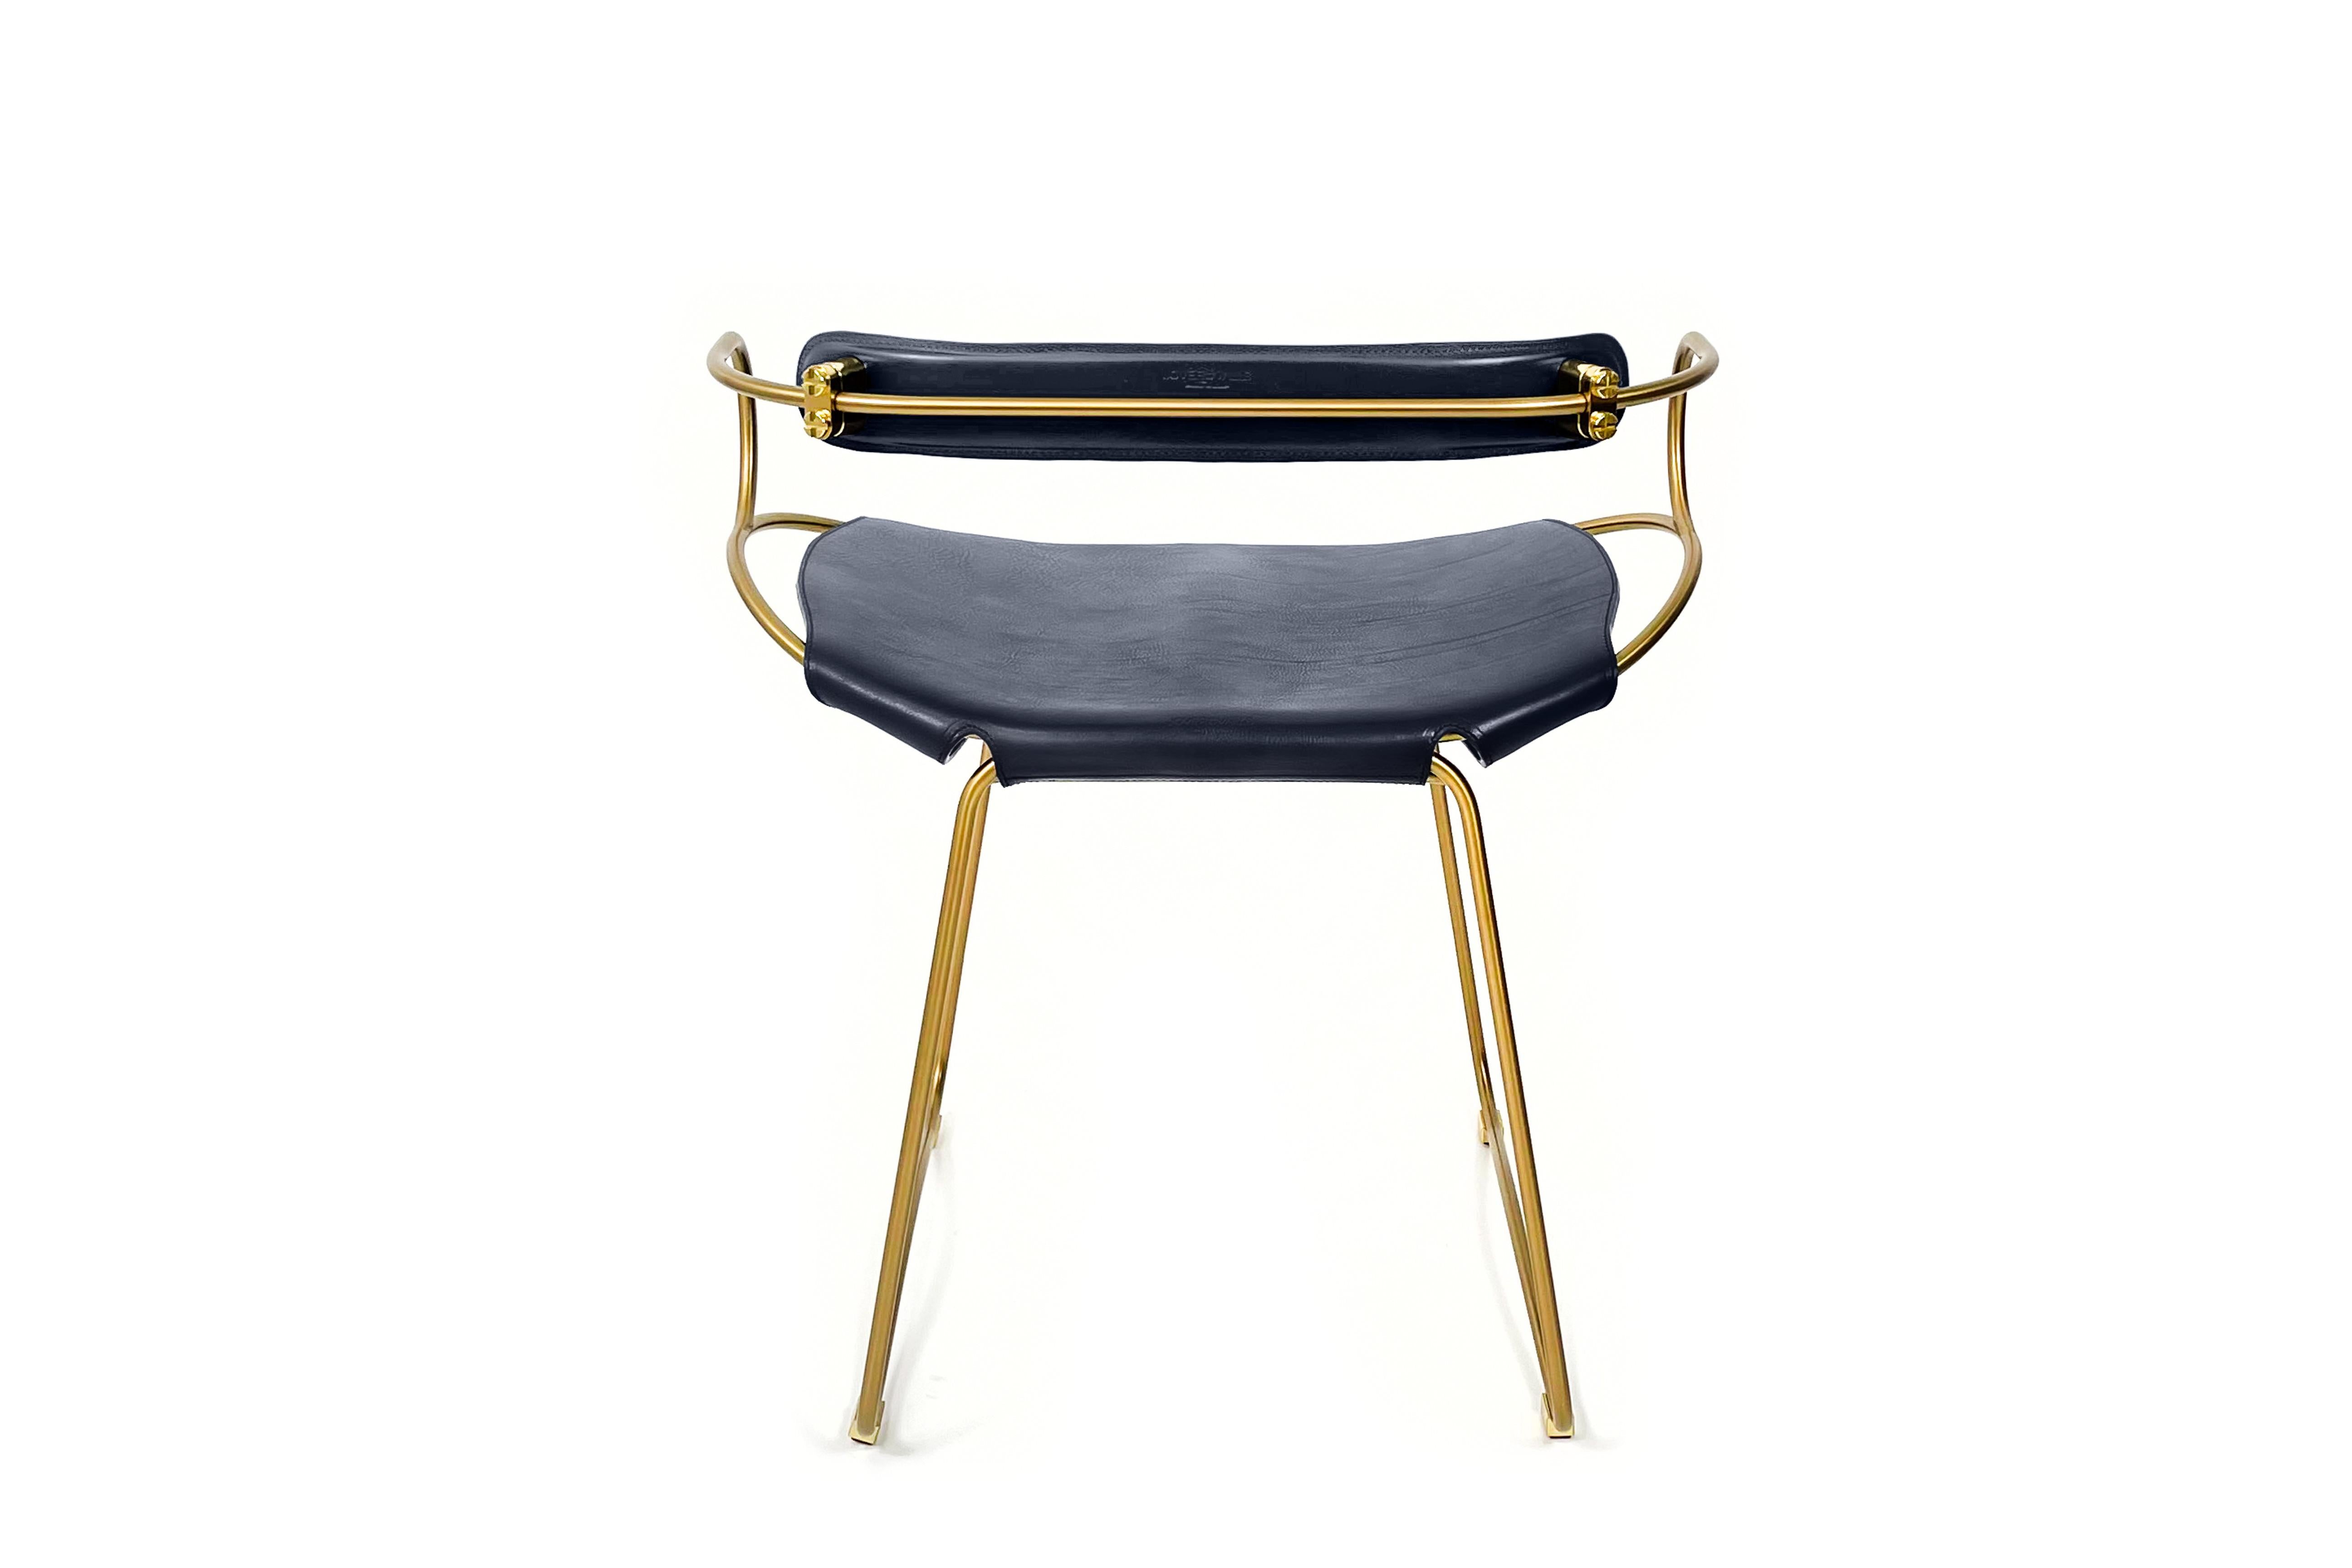 Vegetable Dyed Contemporary Chair / Table Stool W Backrest Aged Brass Metal & Navy Blue Leather For Sale